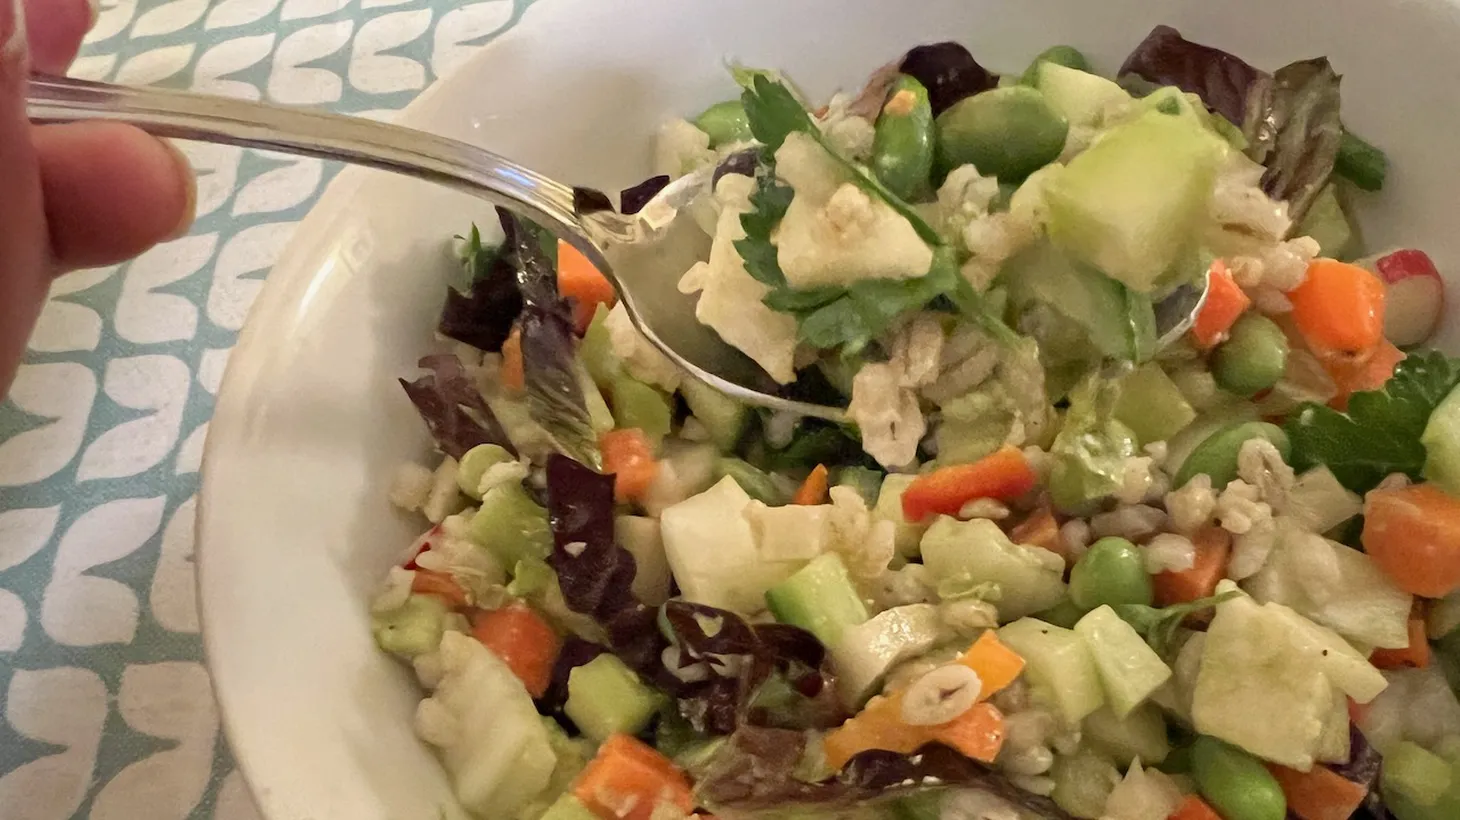 Try a chopped salad filled with textures and flavors you can eat with a spoon.